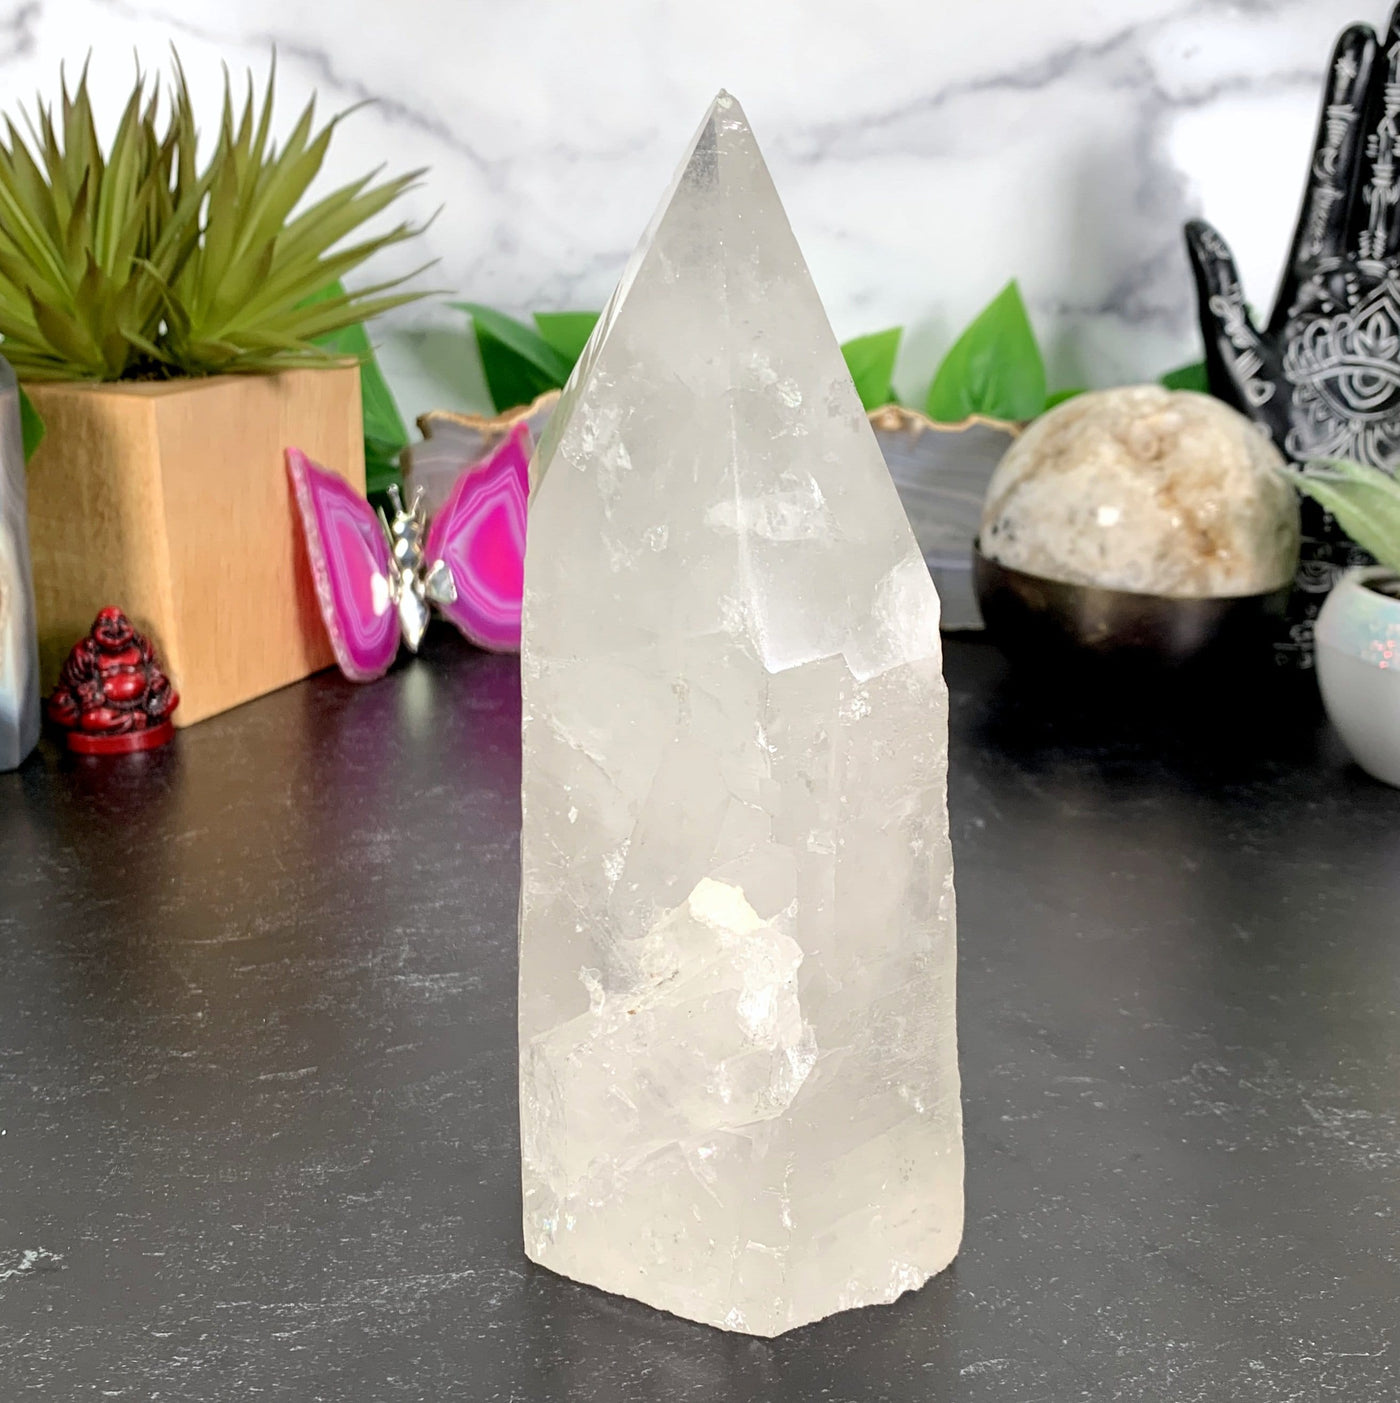 Quartz Point With Crystal Growth with decorations in the background